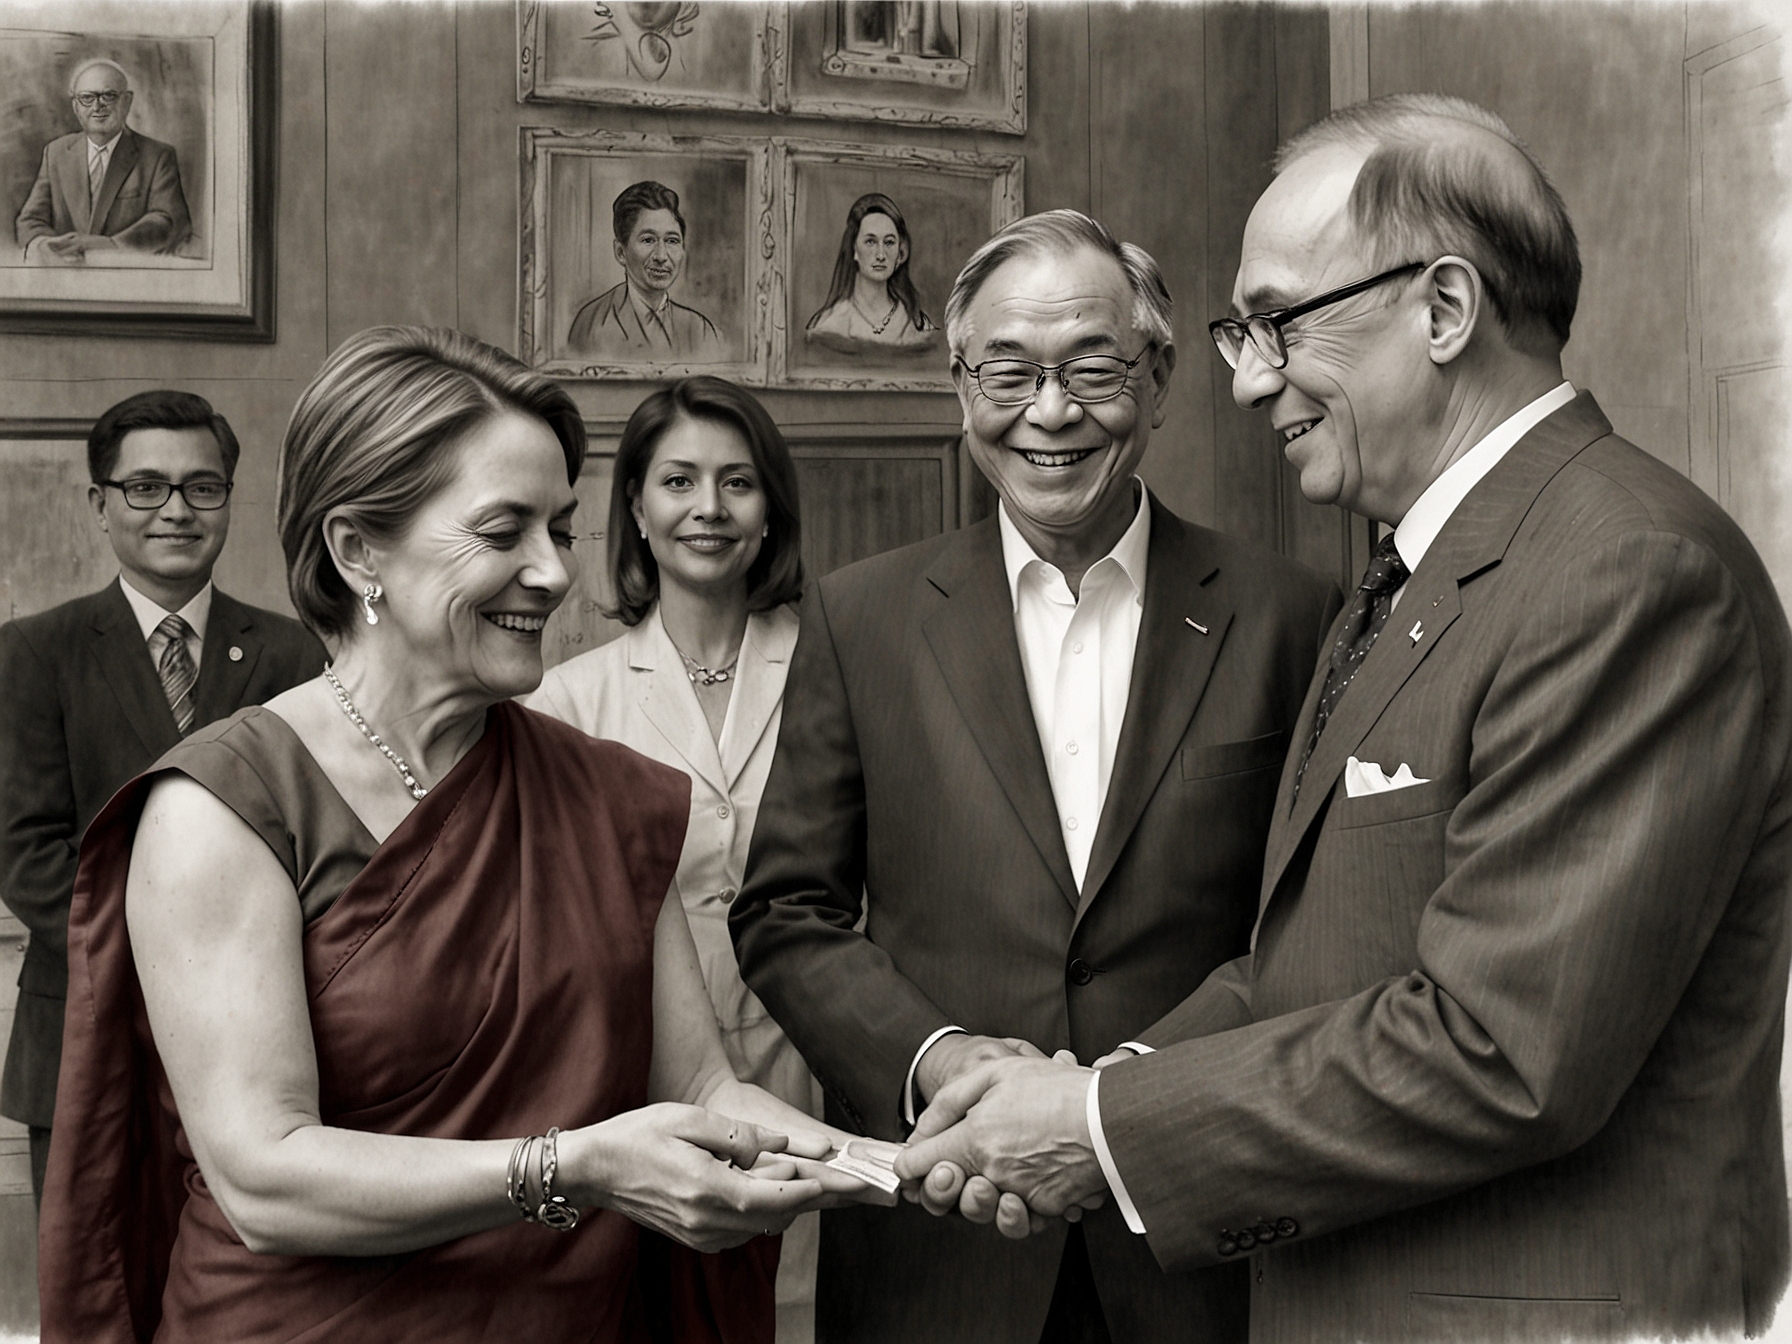 The Dalai Lama meeting with Nancy Pelosi and US delegation members in India, symbolizing strong US-India relations and shared values of democracy and religious freedom.